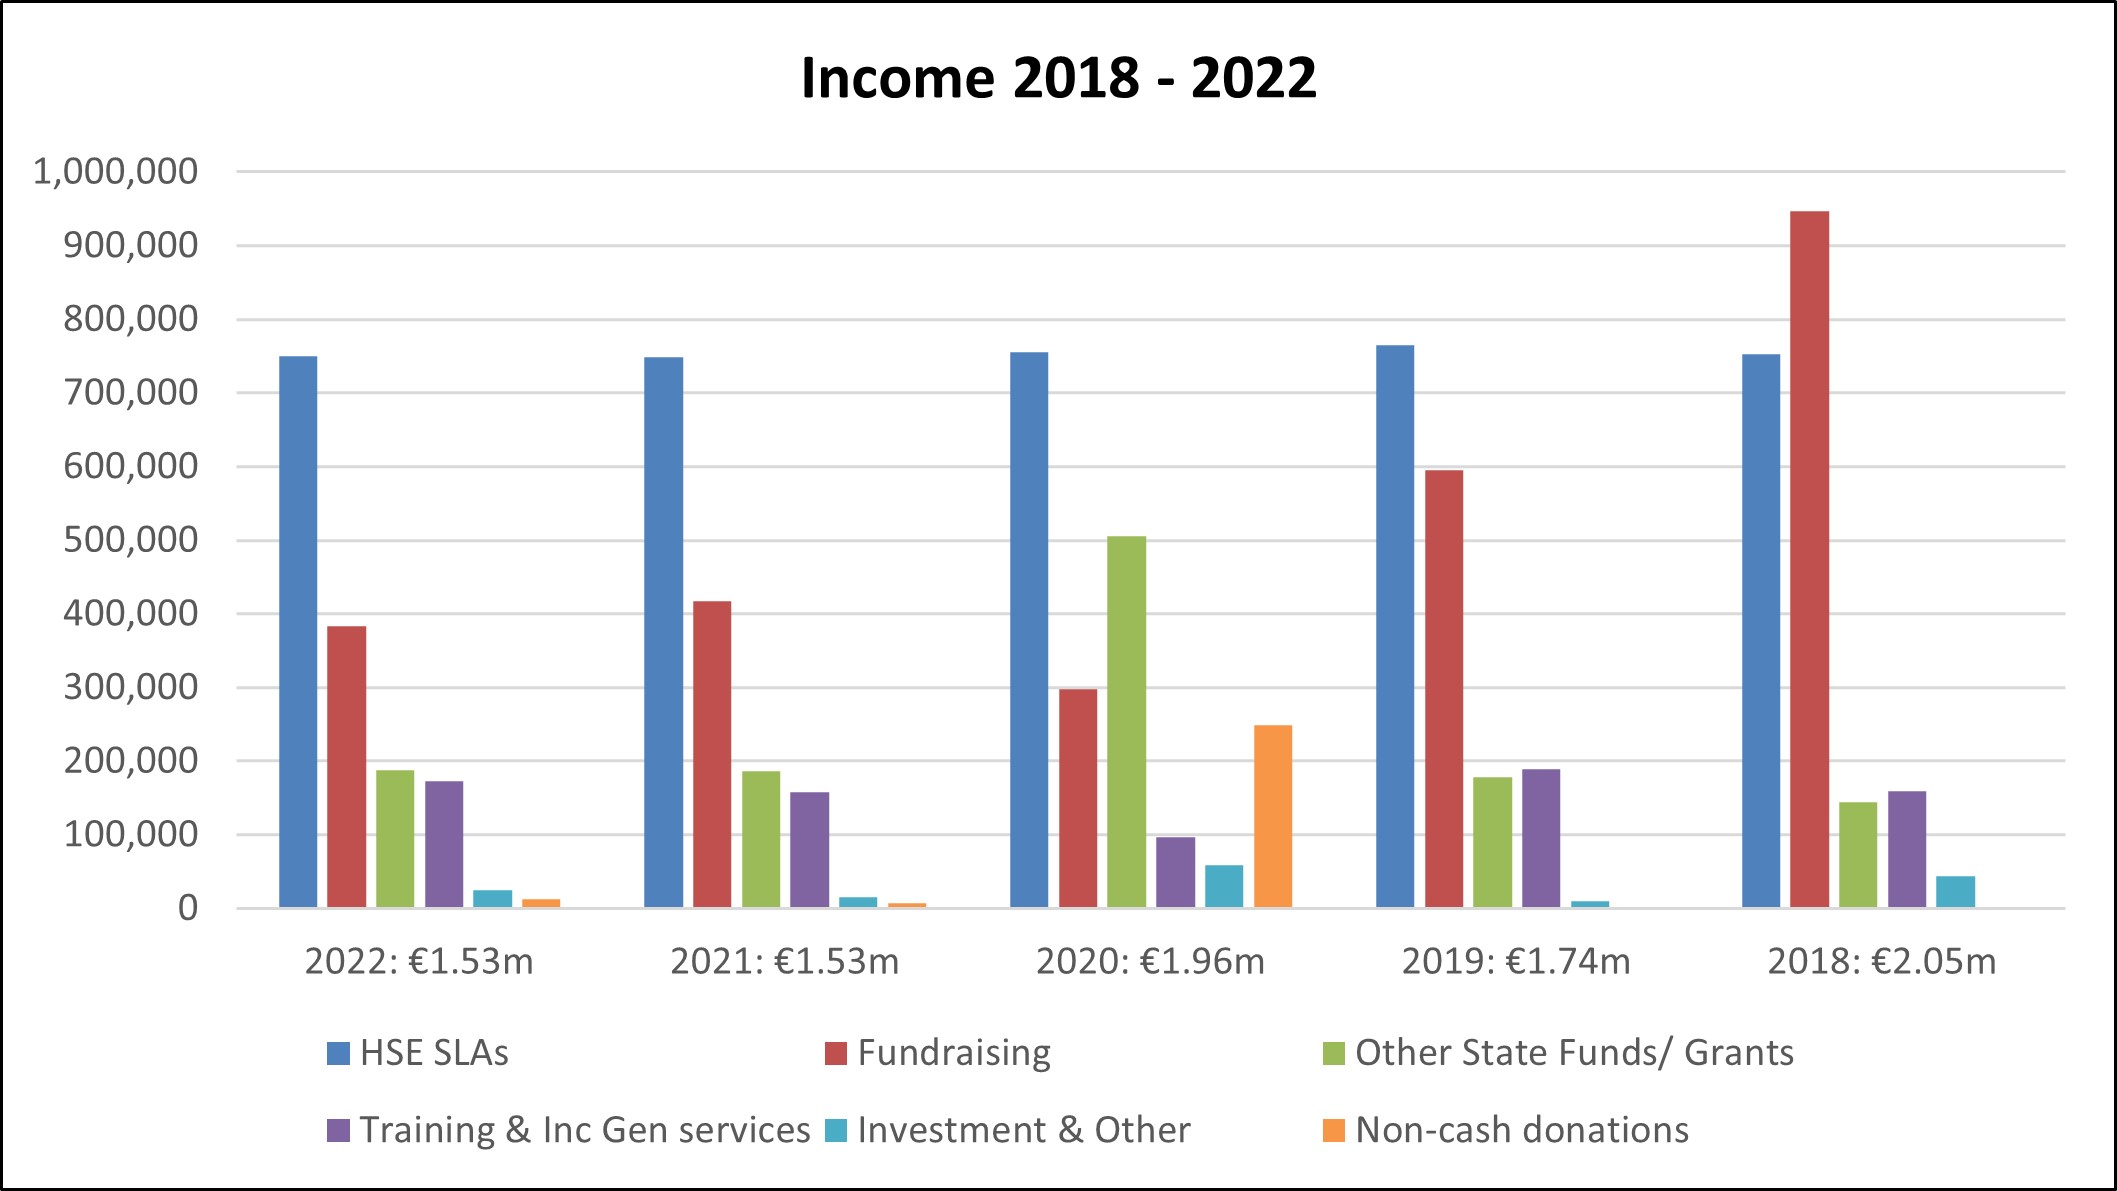 Chart showing changes in income from 2018 - 2022